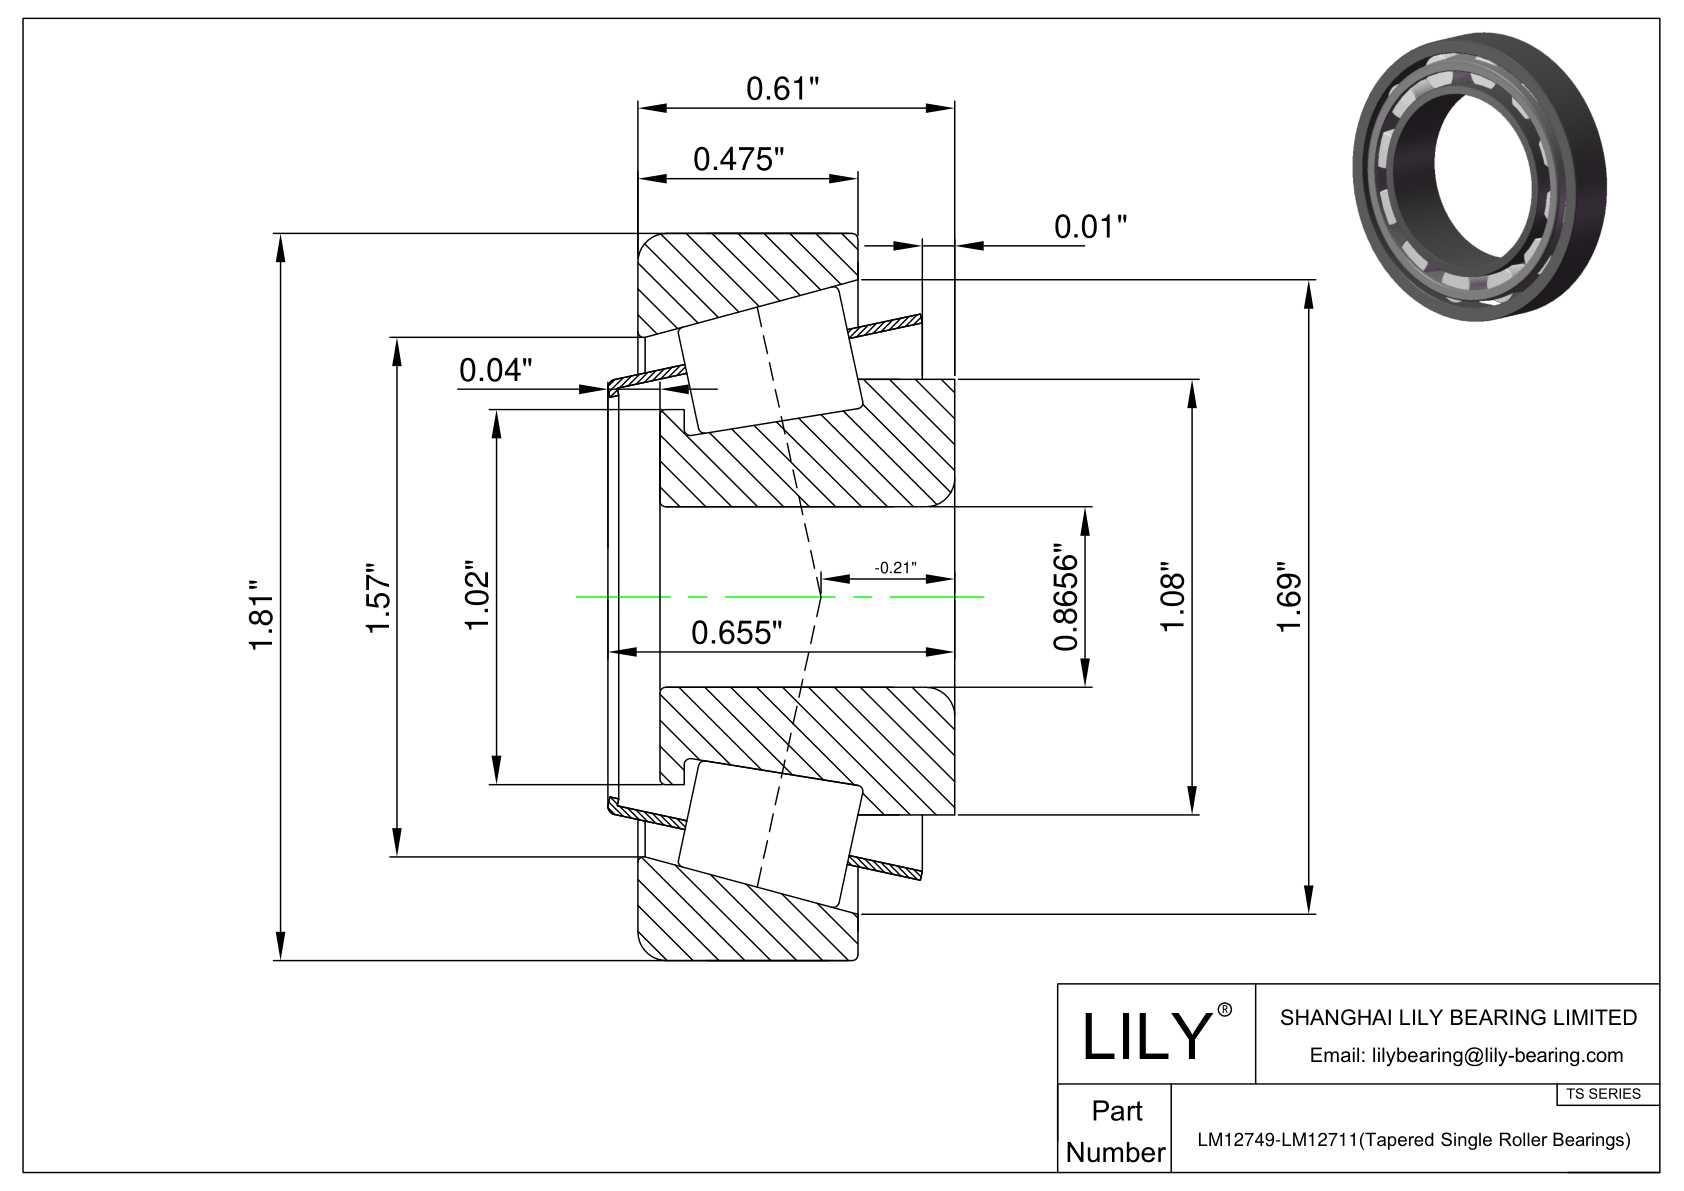 LM12749-LM12711 TS (Tapered Single Roller Bearings) (Imperial) cad drawing